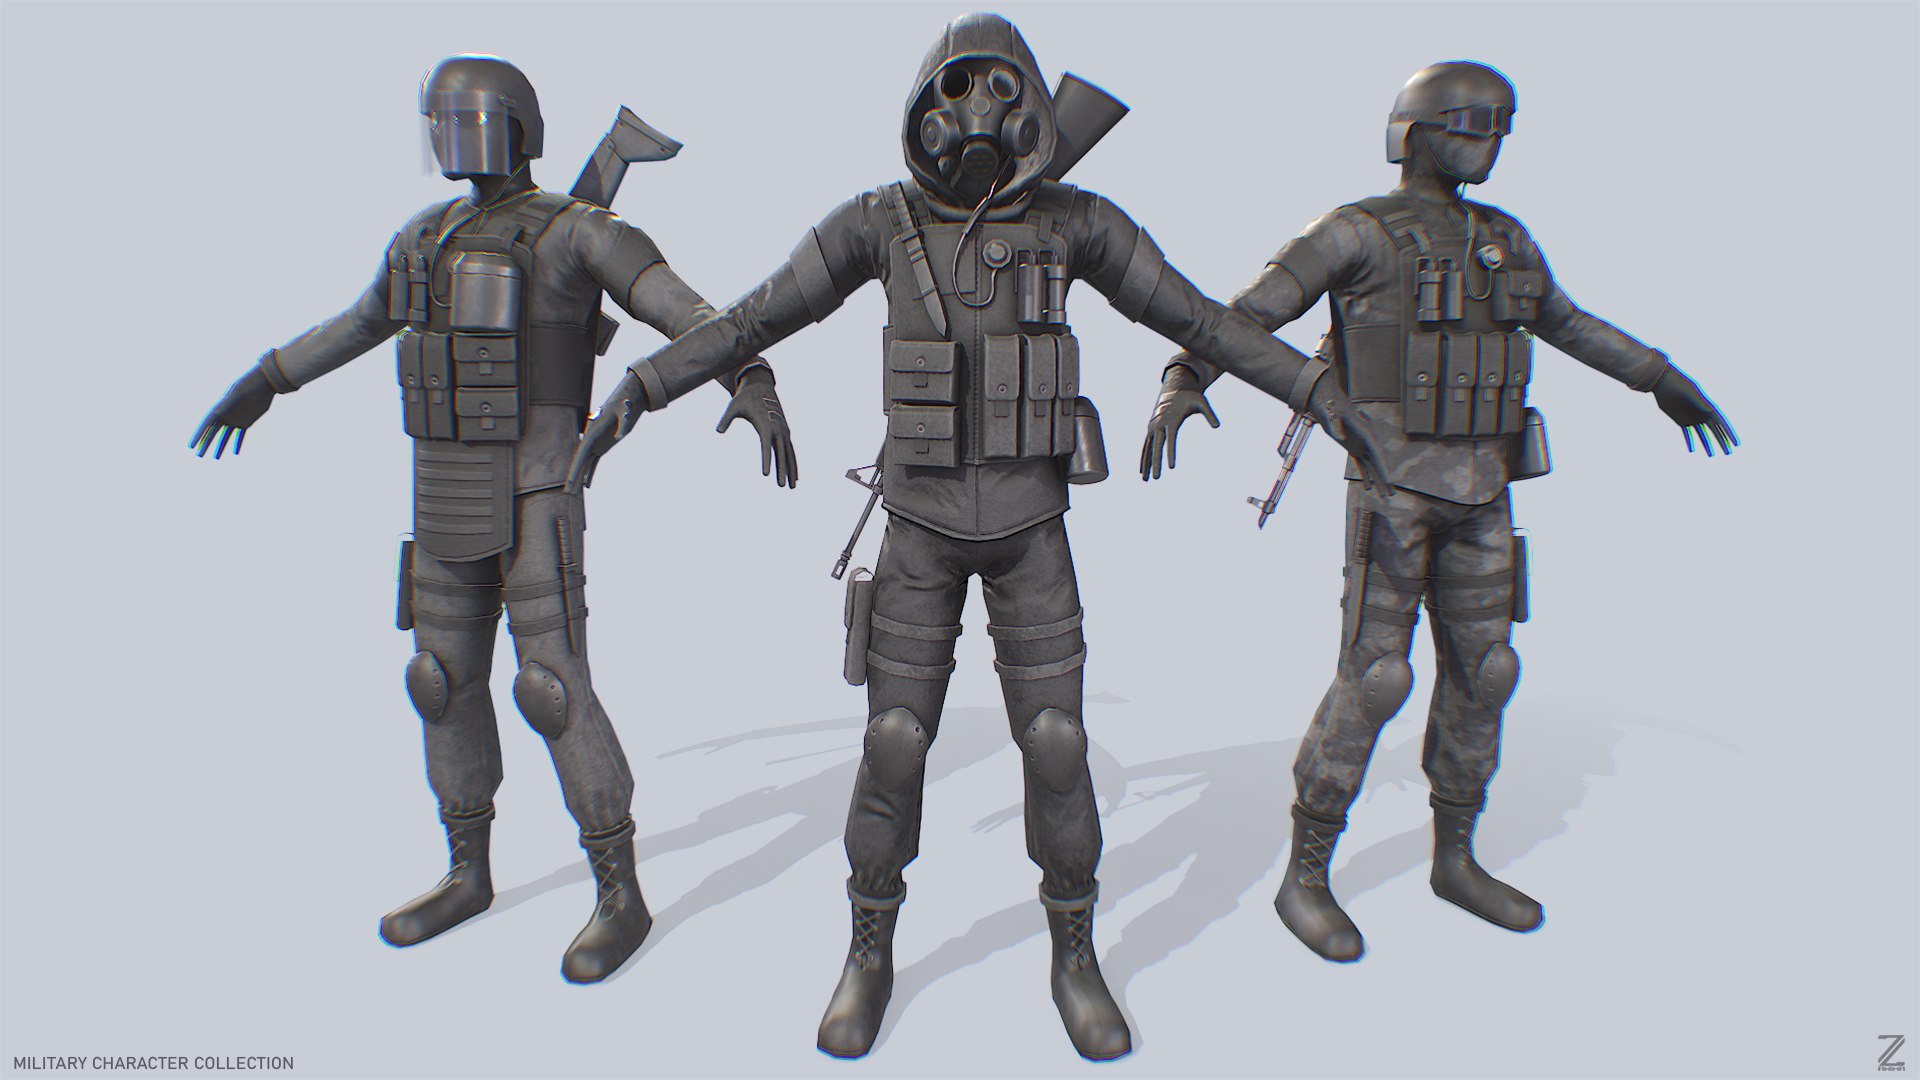 Military Character collection 3D model - TurboSquid 2159651